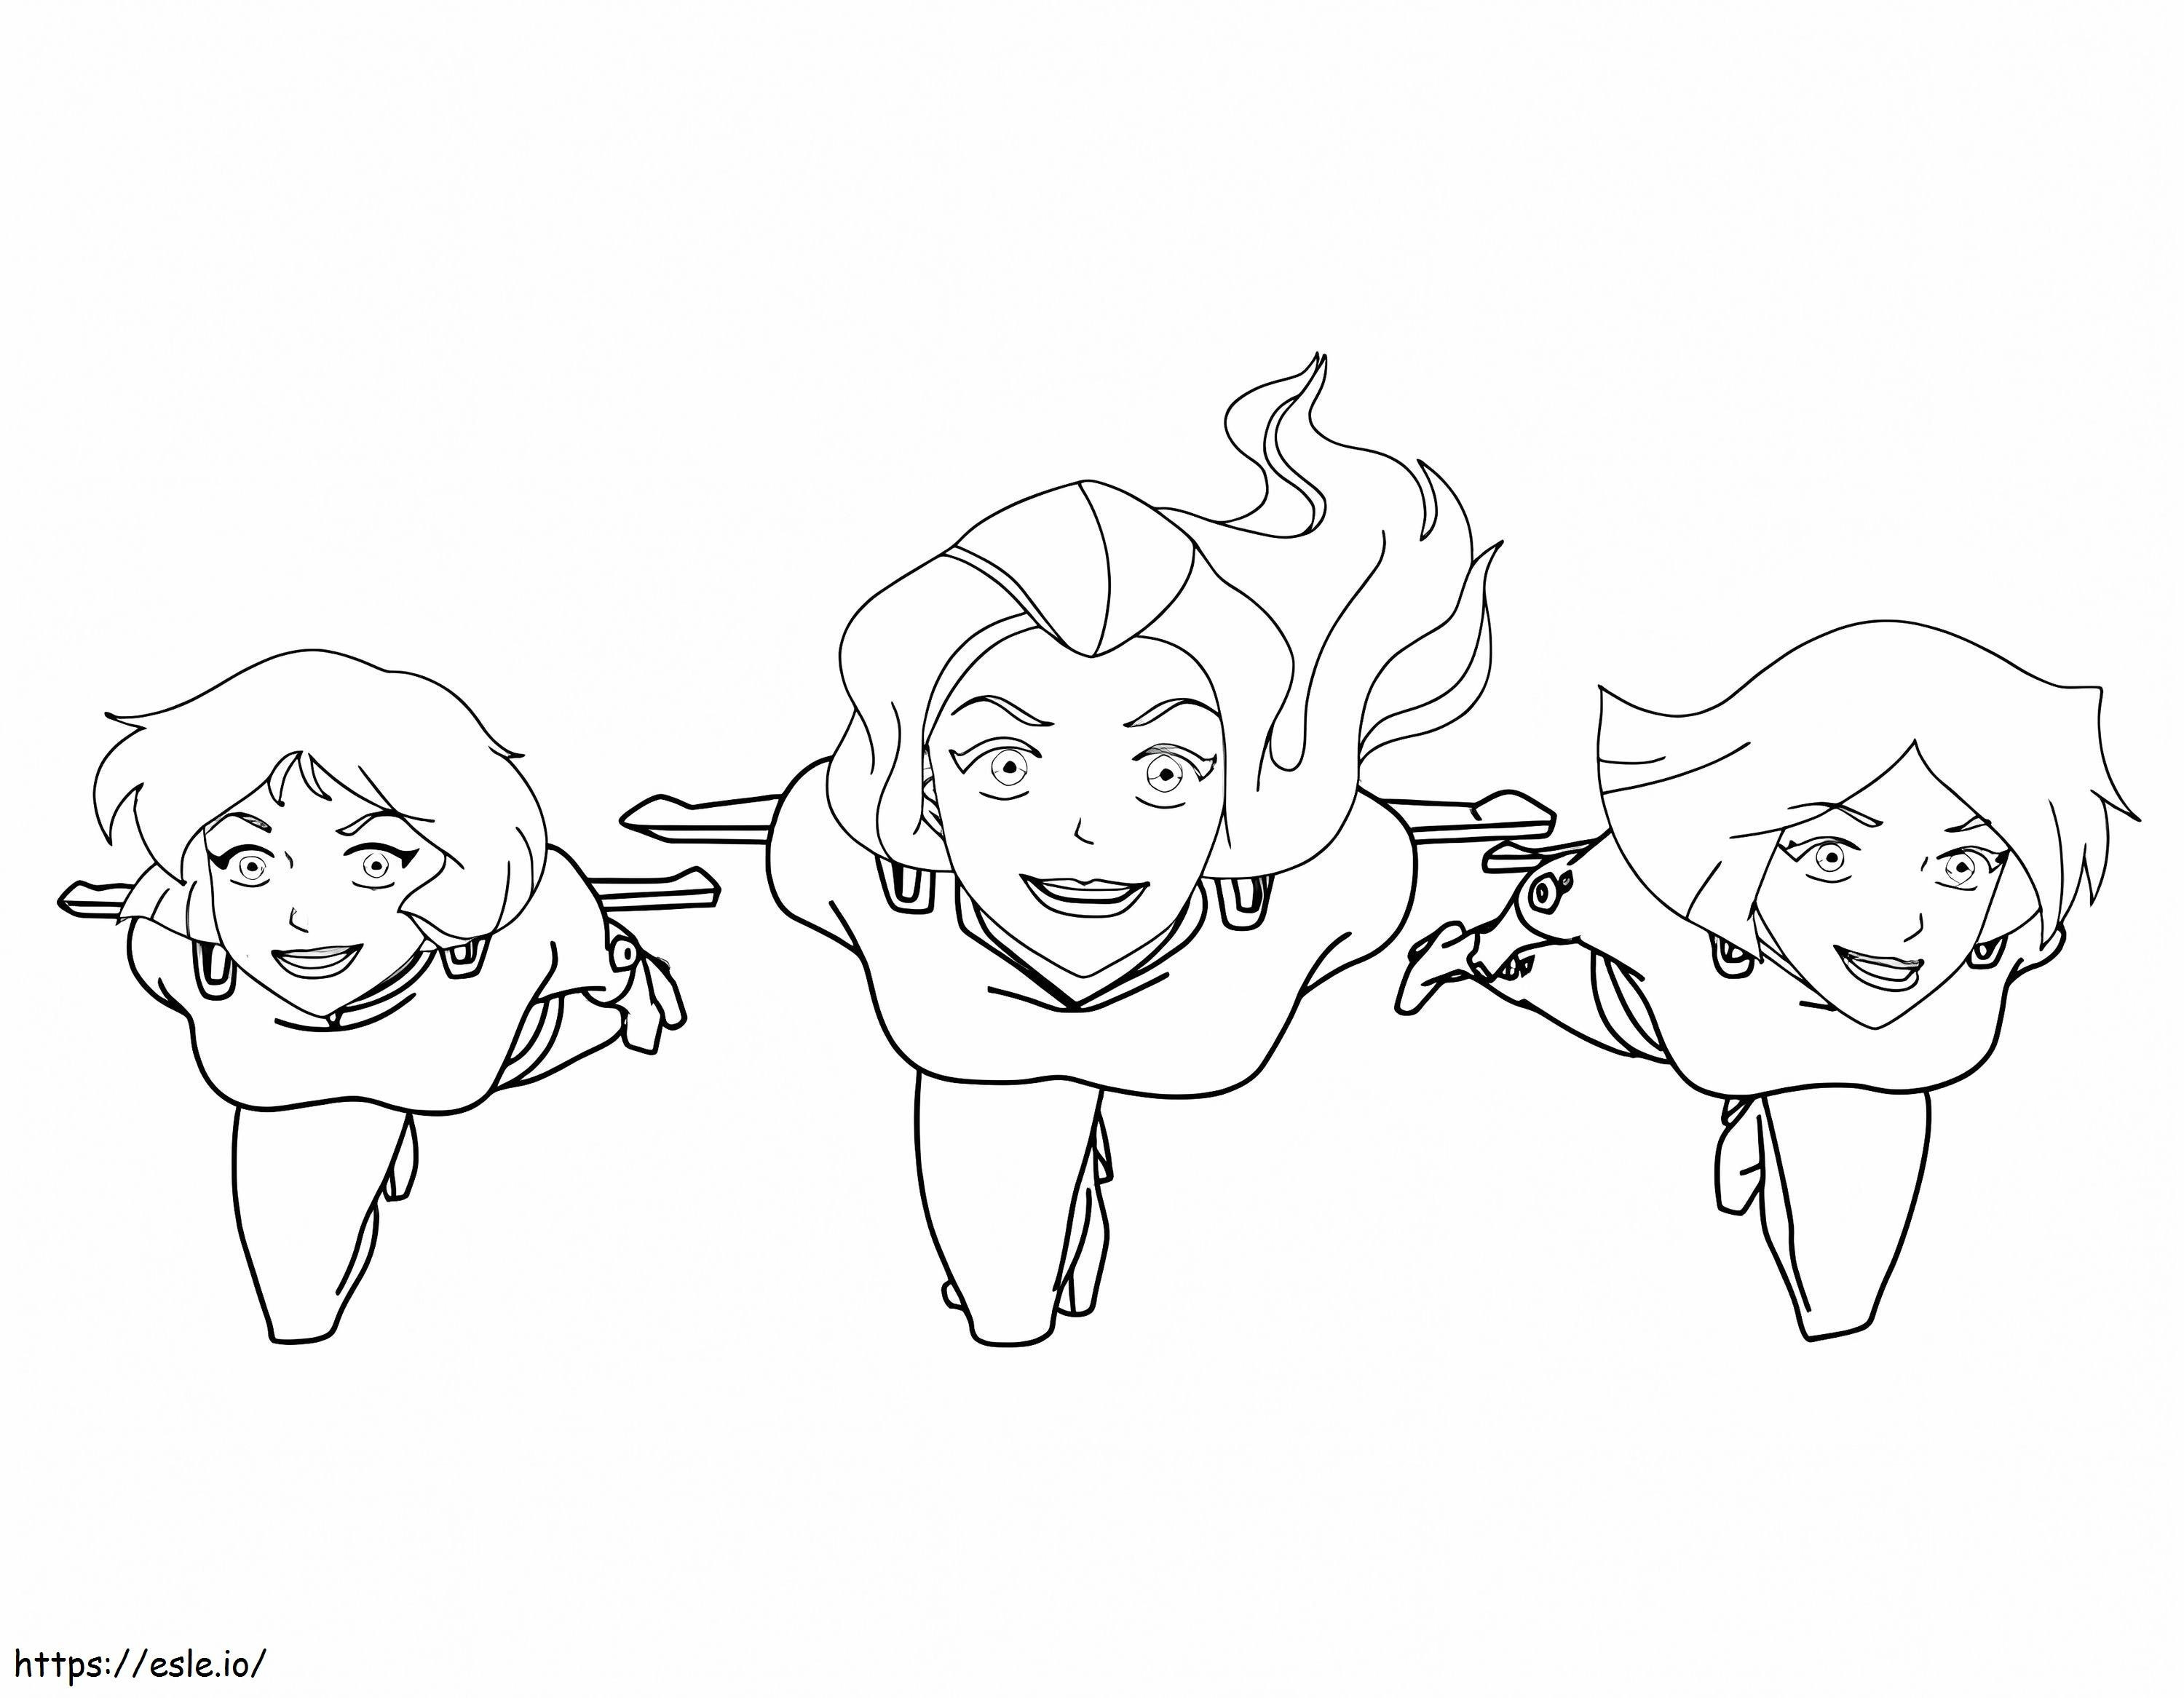 Totally Spies 6 coloring page